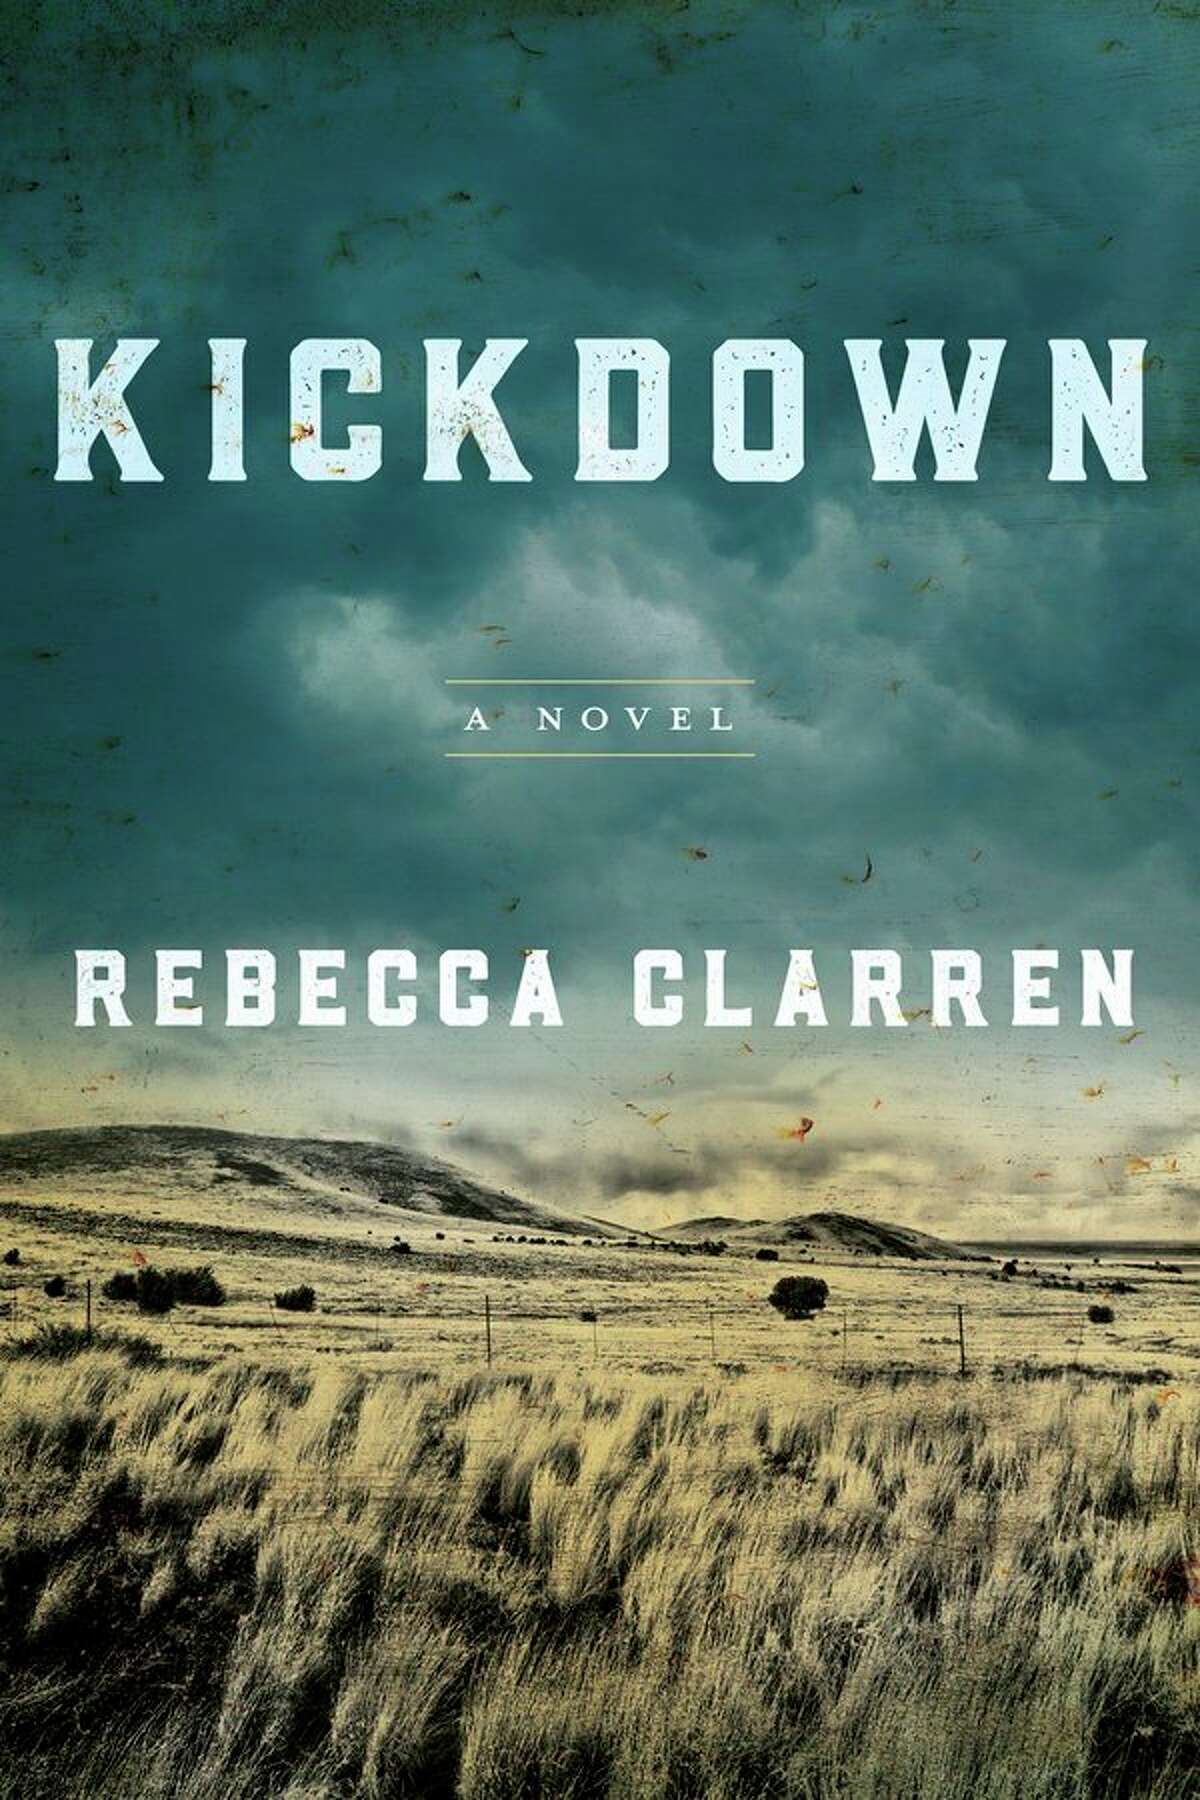 The cover of 'Kickdown' by Rebecca Clarren. (Photo provided)